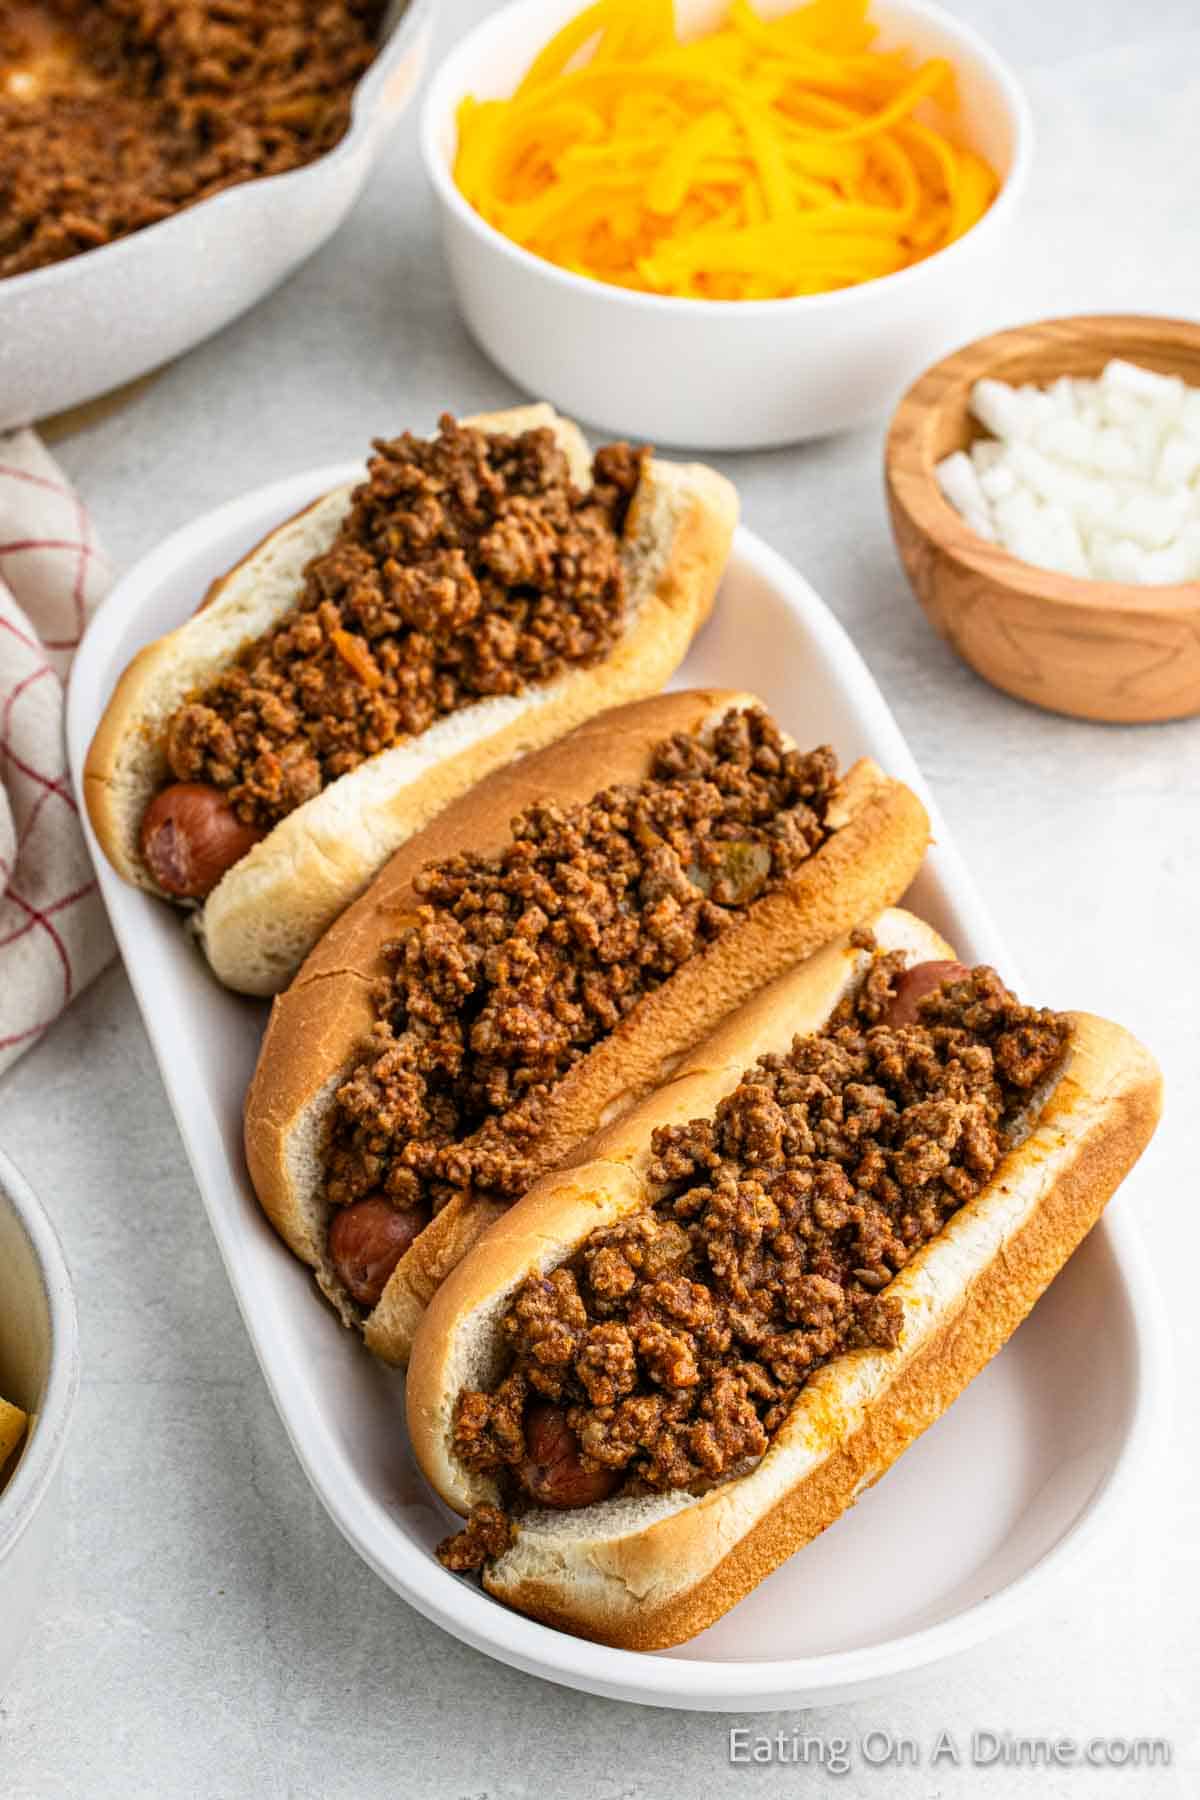 Hot dogs topped with chili on a platter with a bowl of diced onions on this side